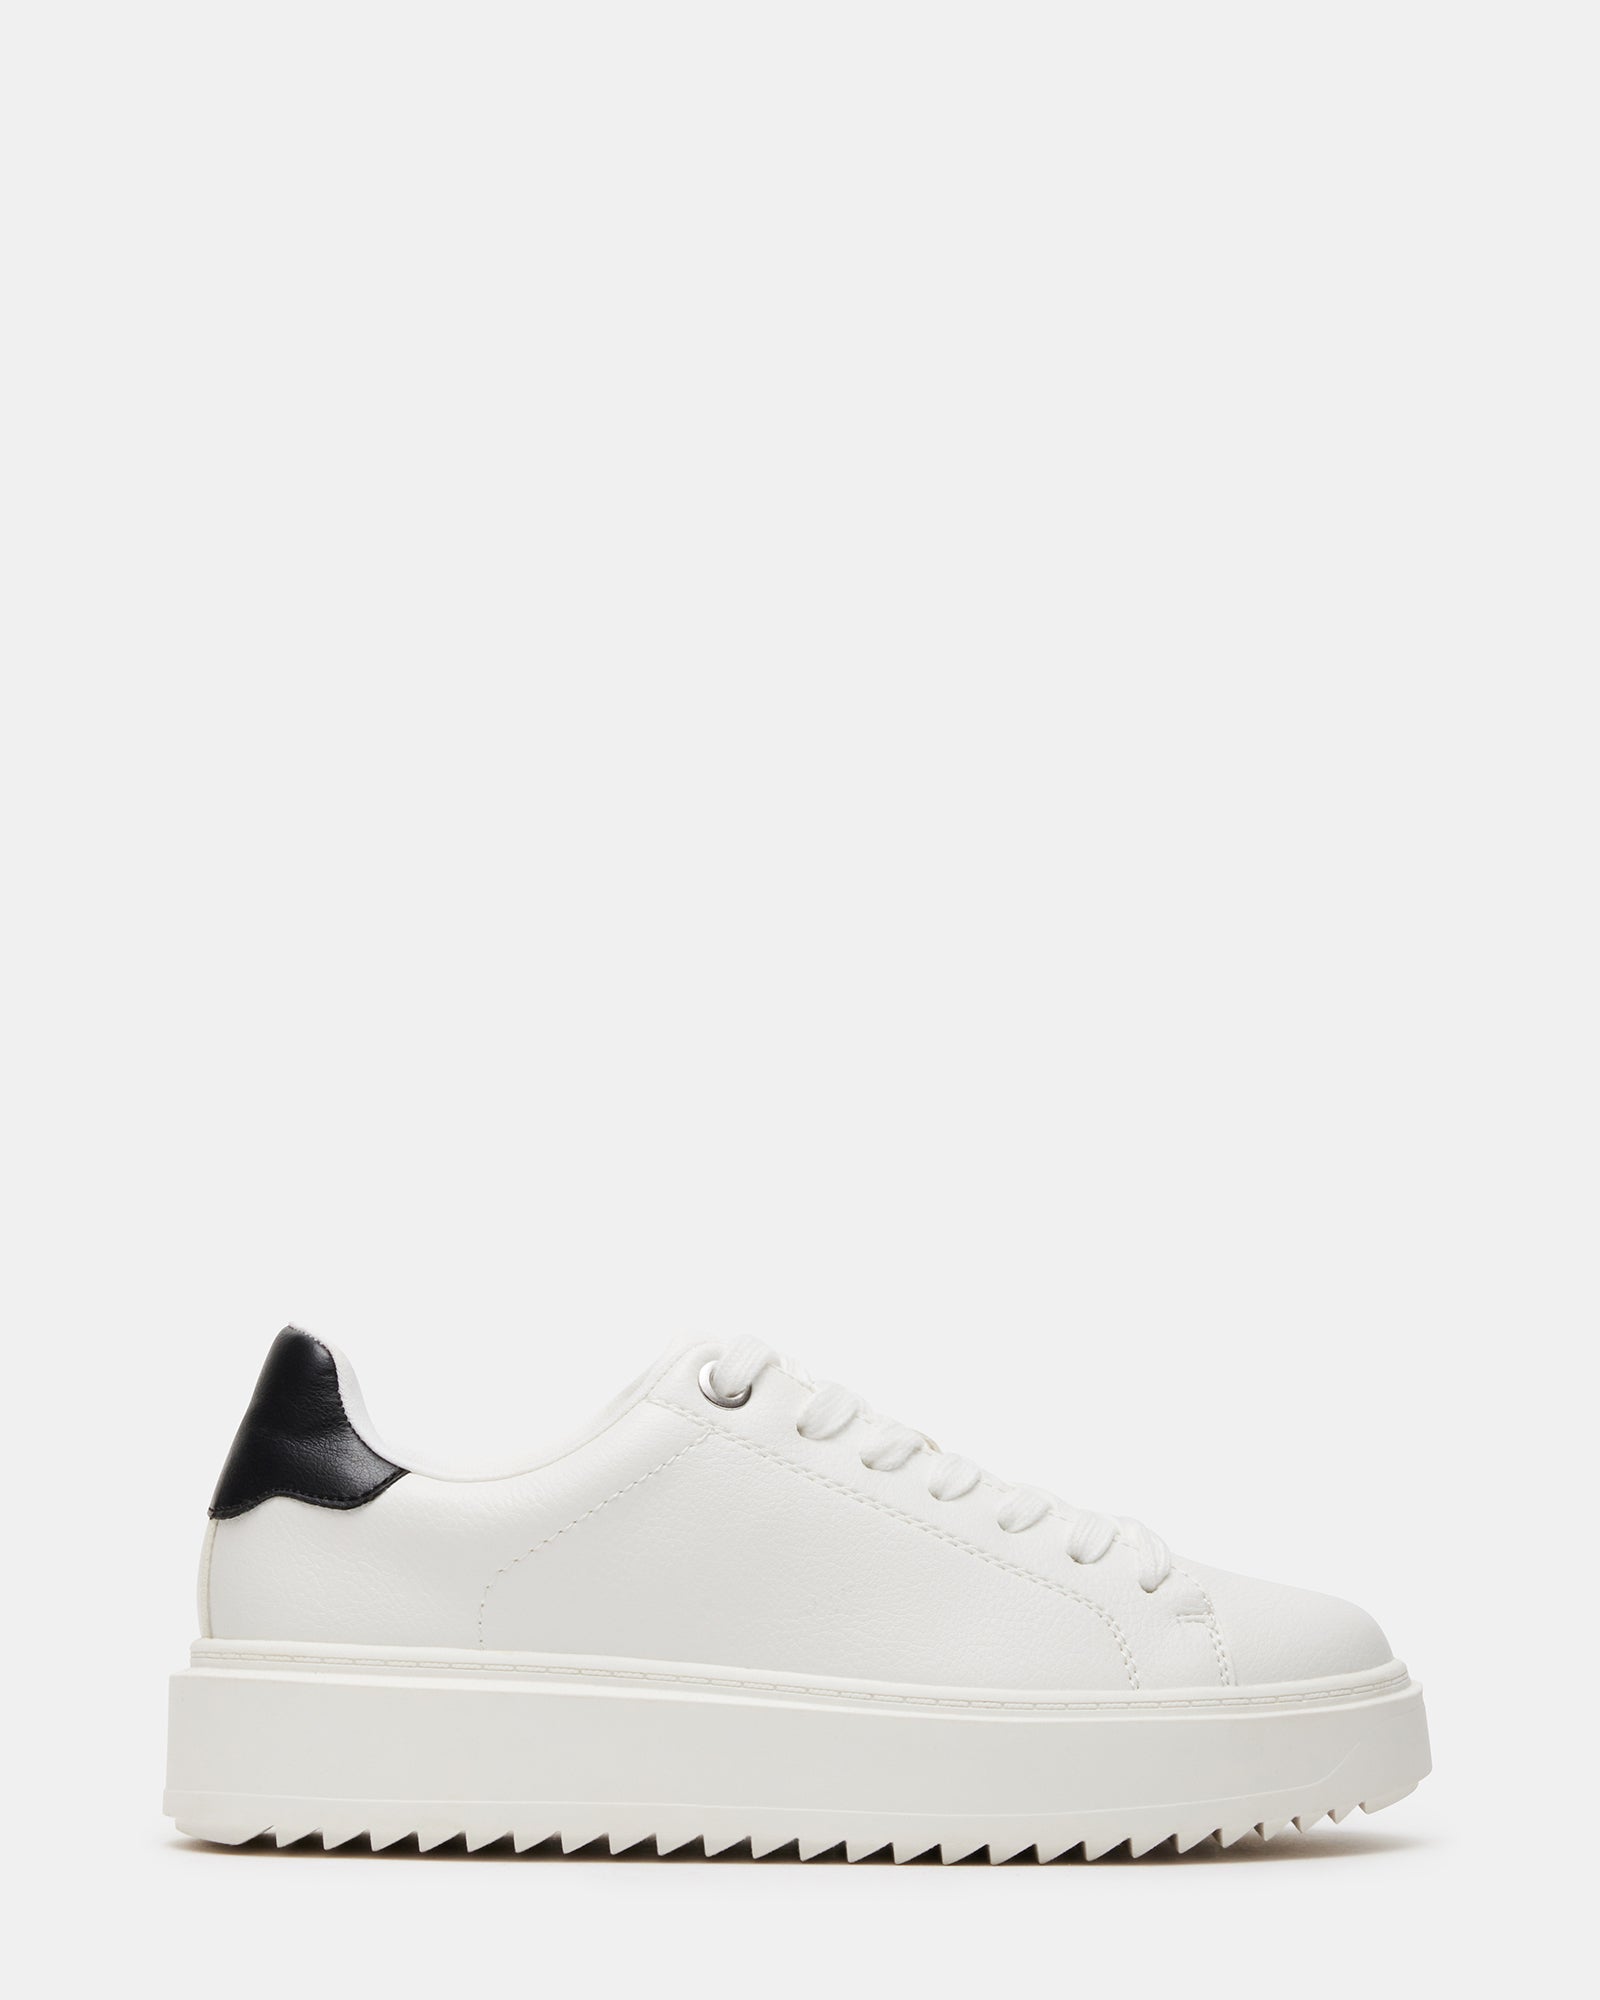 Steve Madden Sprint White Multi Low Top Lace Up